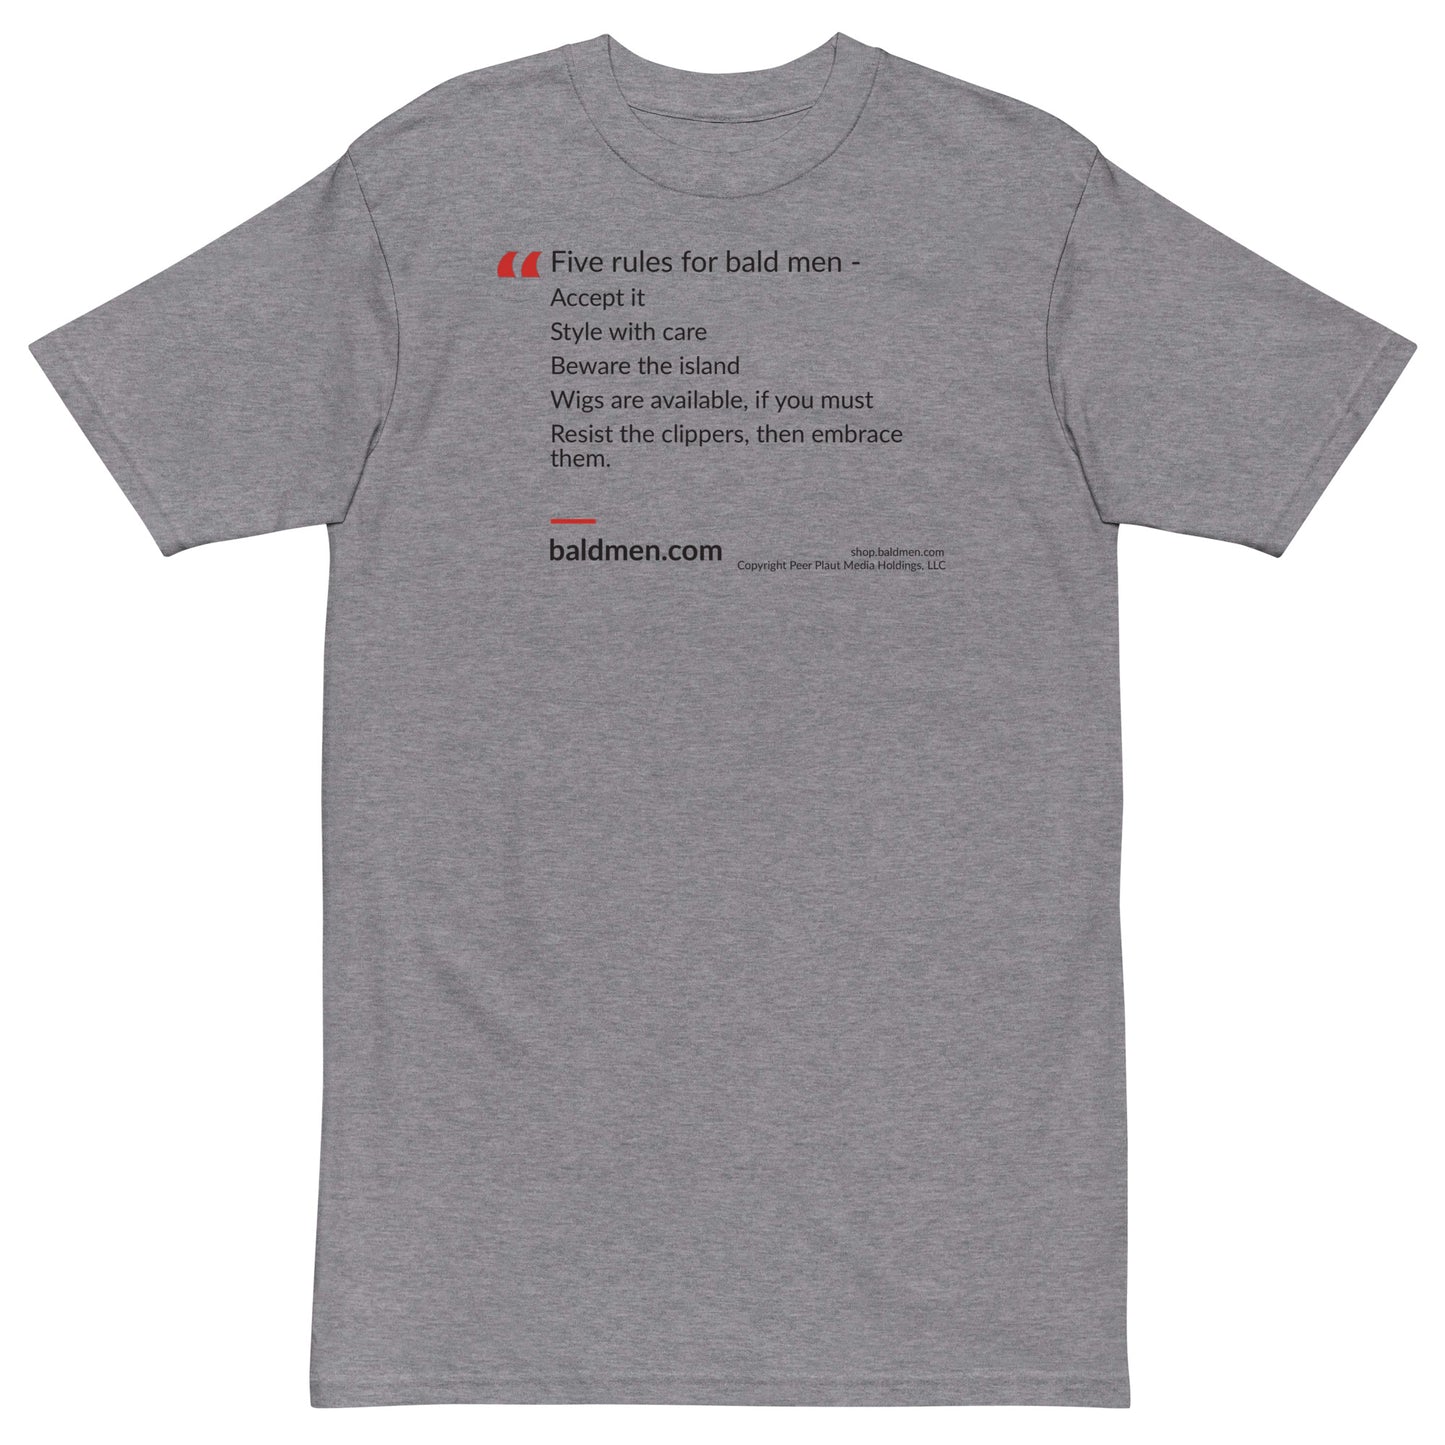 Get into life with the Five Rules for Bald Men Premium T-Shirt - the perfect addition to any man's wardrobe. Men's Premium Heavyweight Tee | Cotton Heritage MC1086